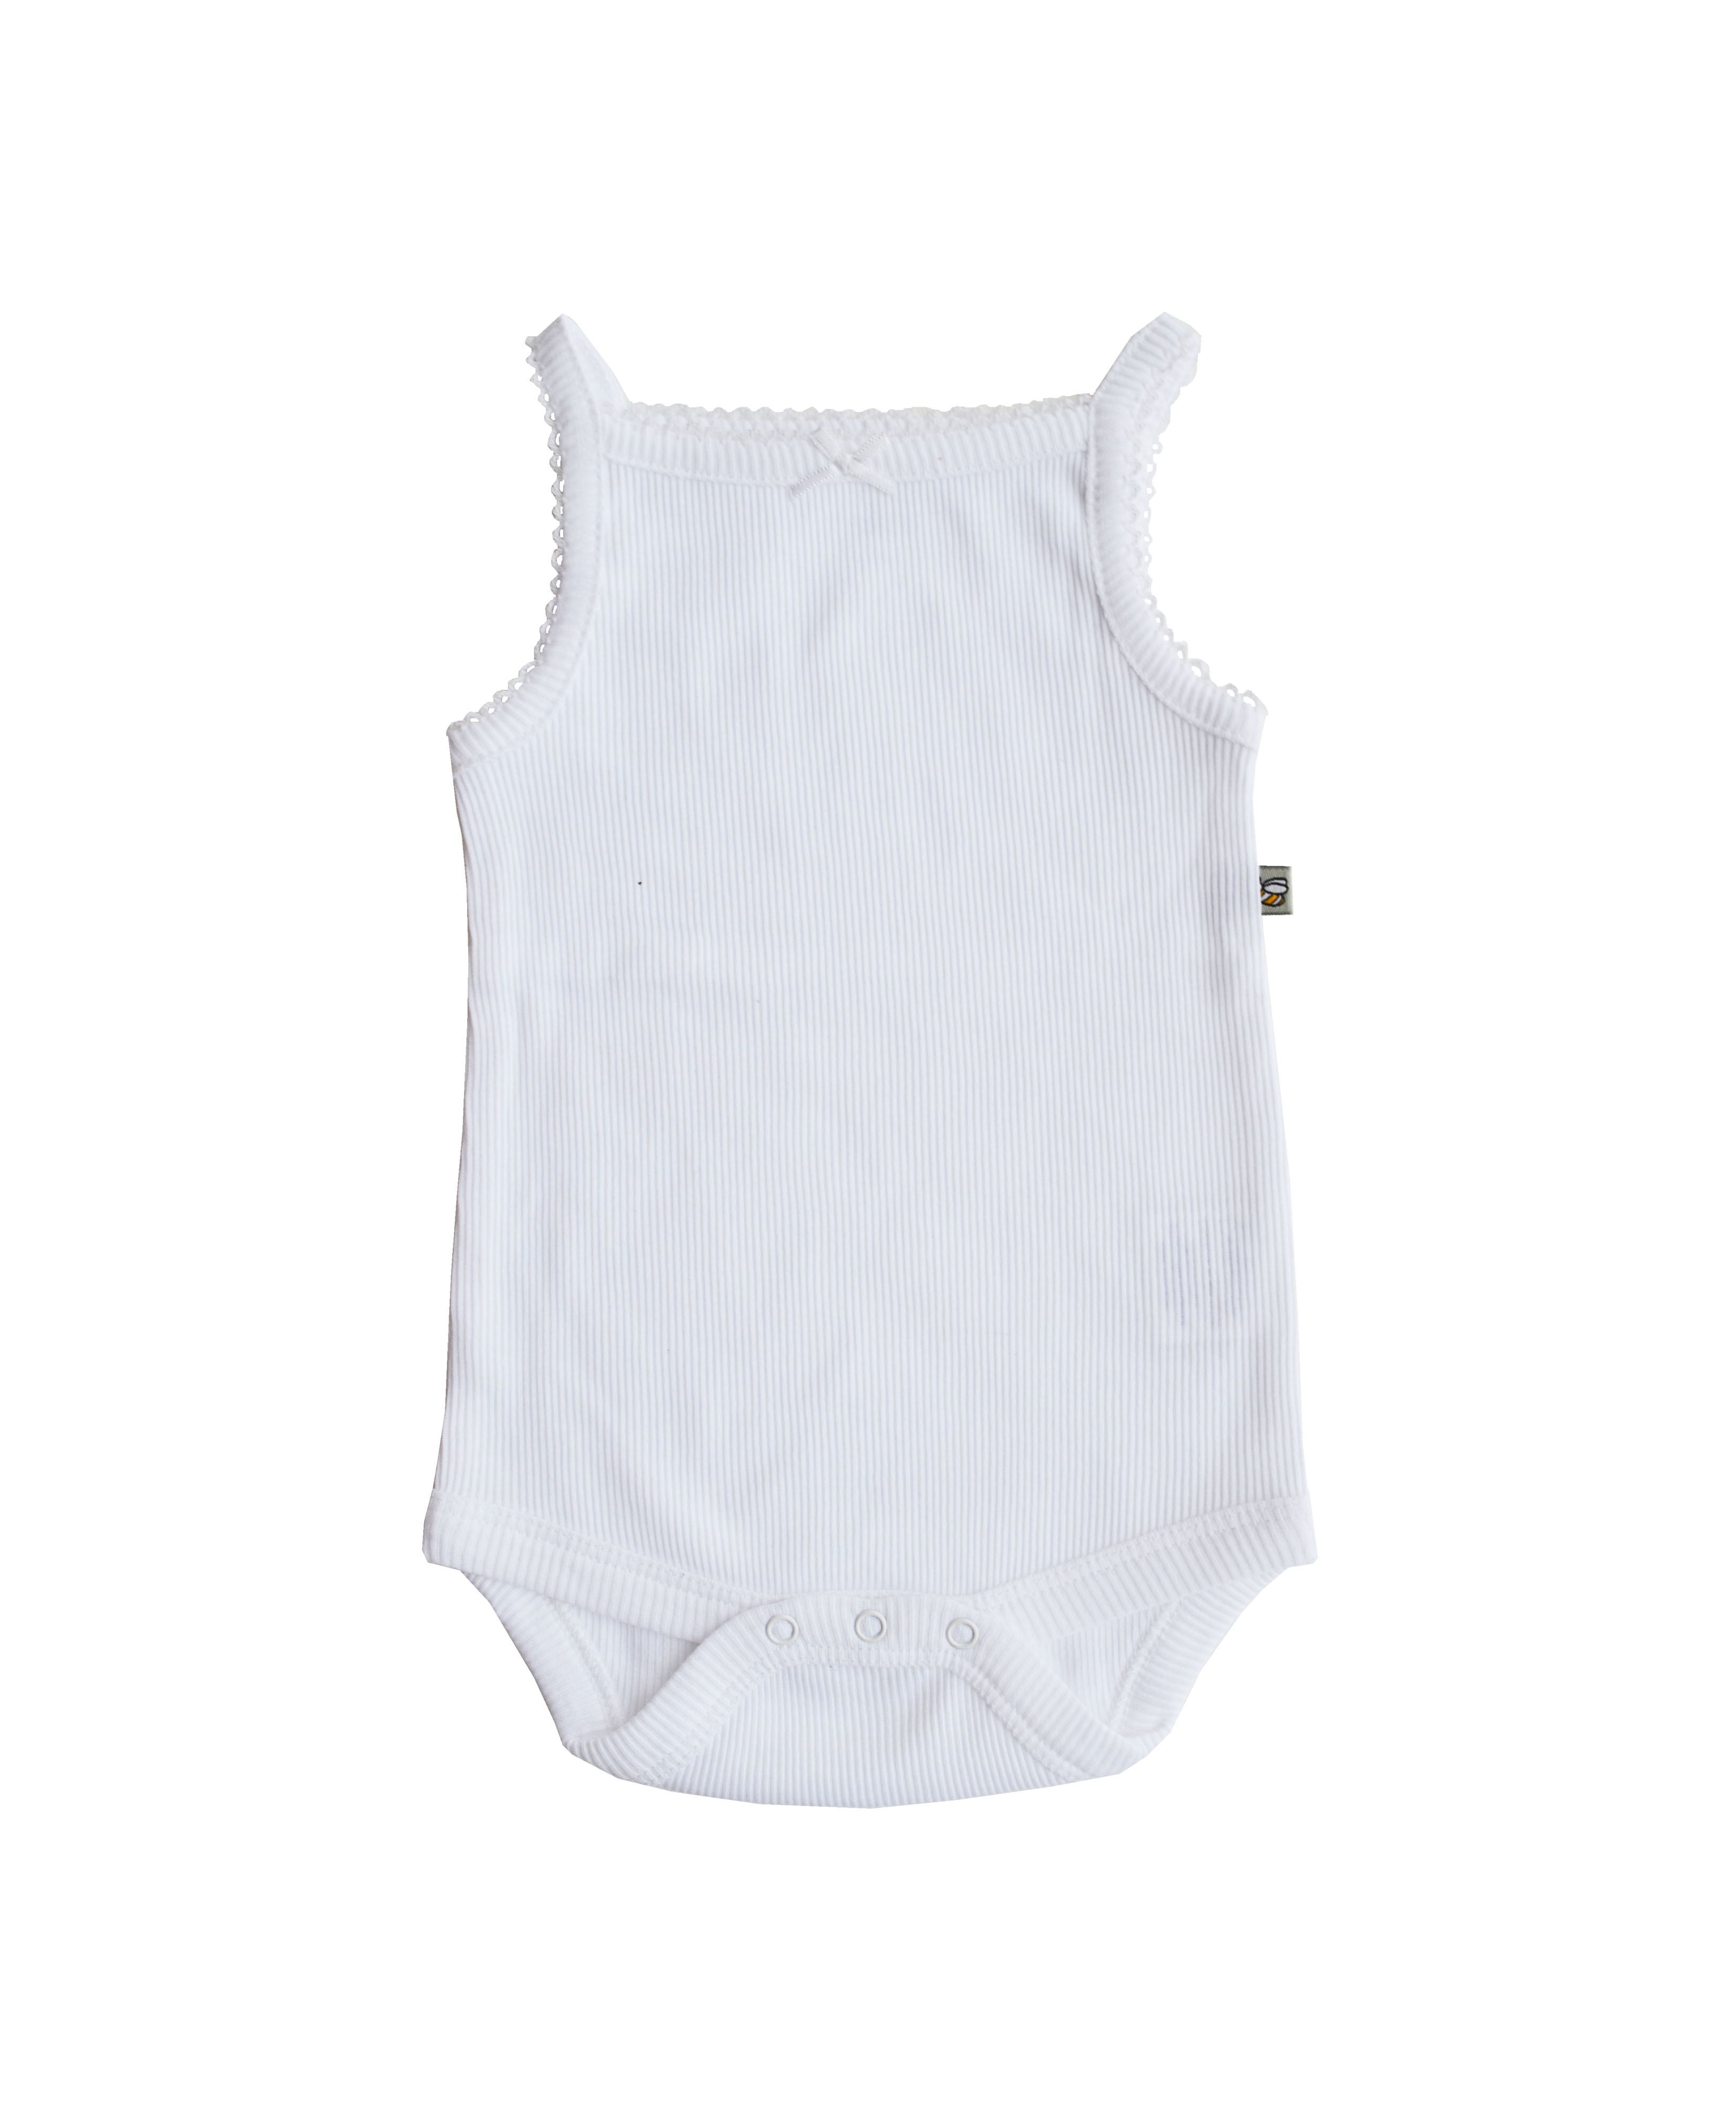 White Rompers/Onesie with satin bow (100% Cotton Rib)